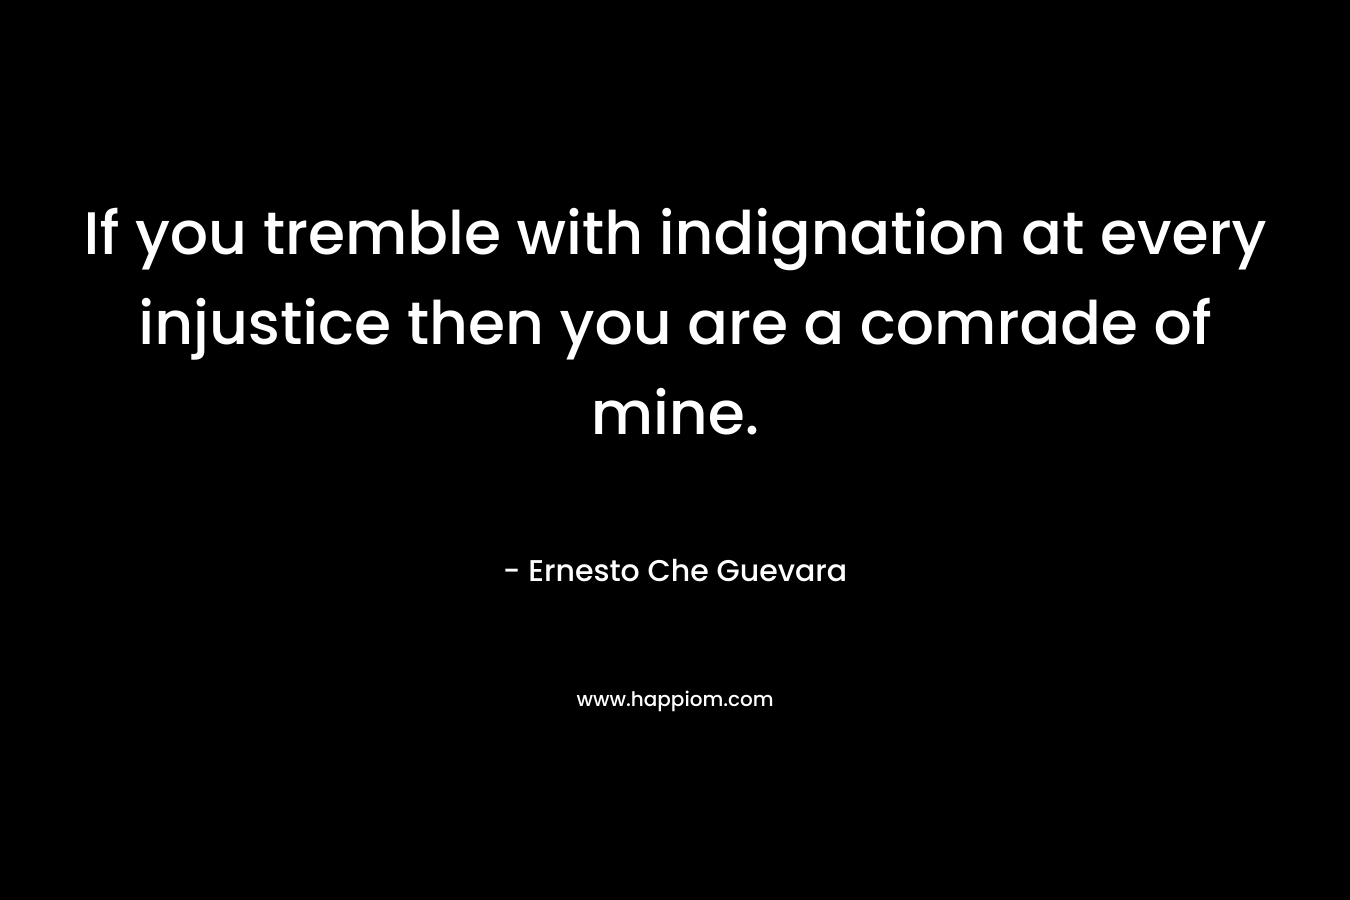 If you tremble with indignation at every injustice then you are a comrade of mine. – Ernesto Che Guevara